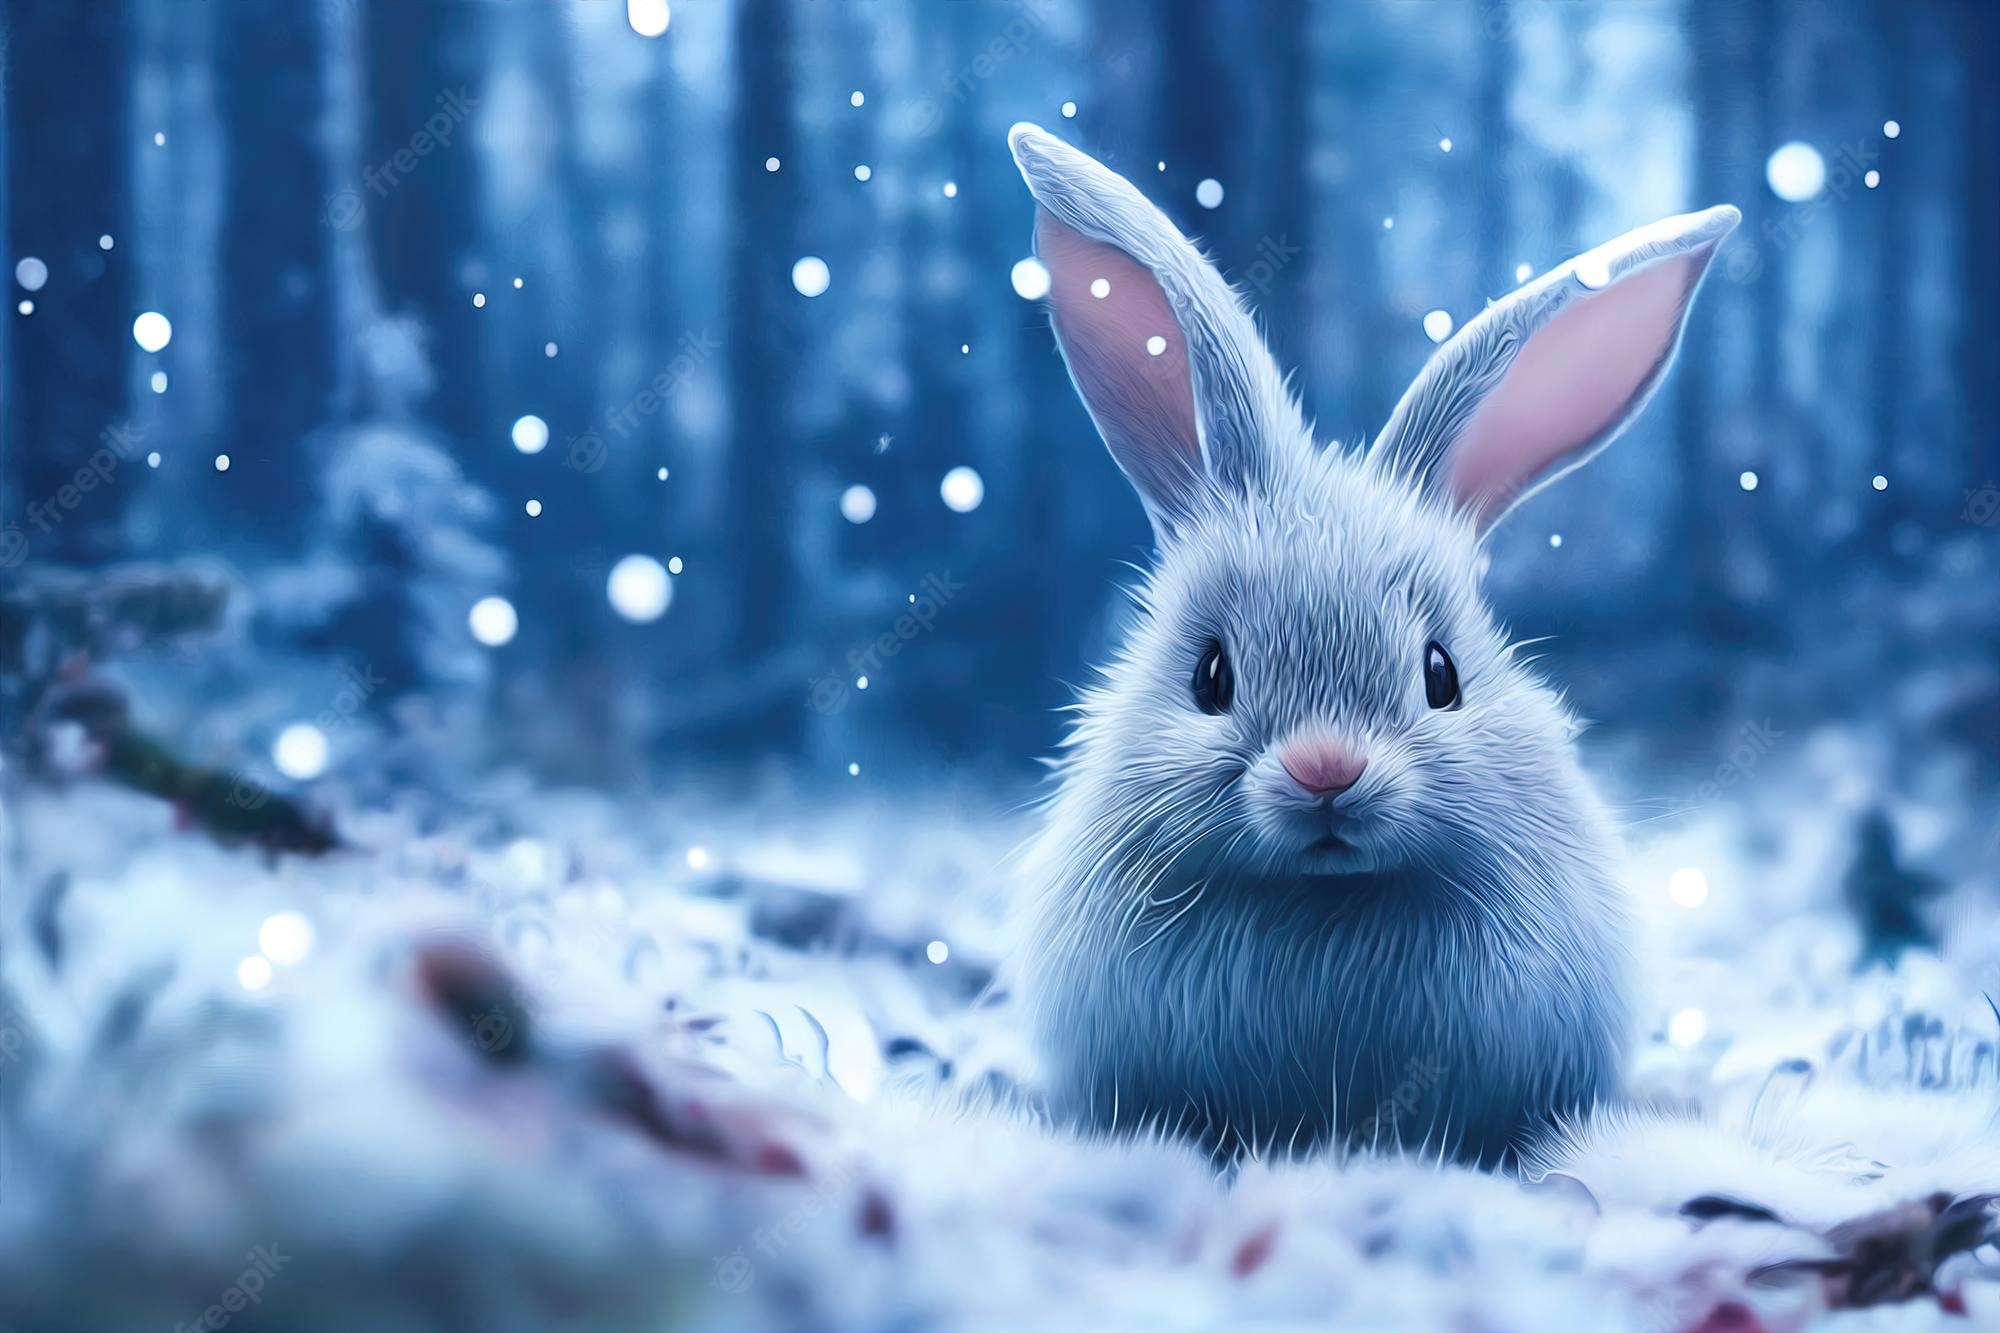 Premium Photo. Rabbit in the winter forest christmas background